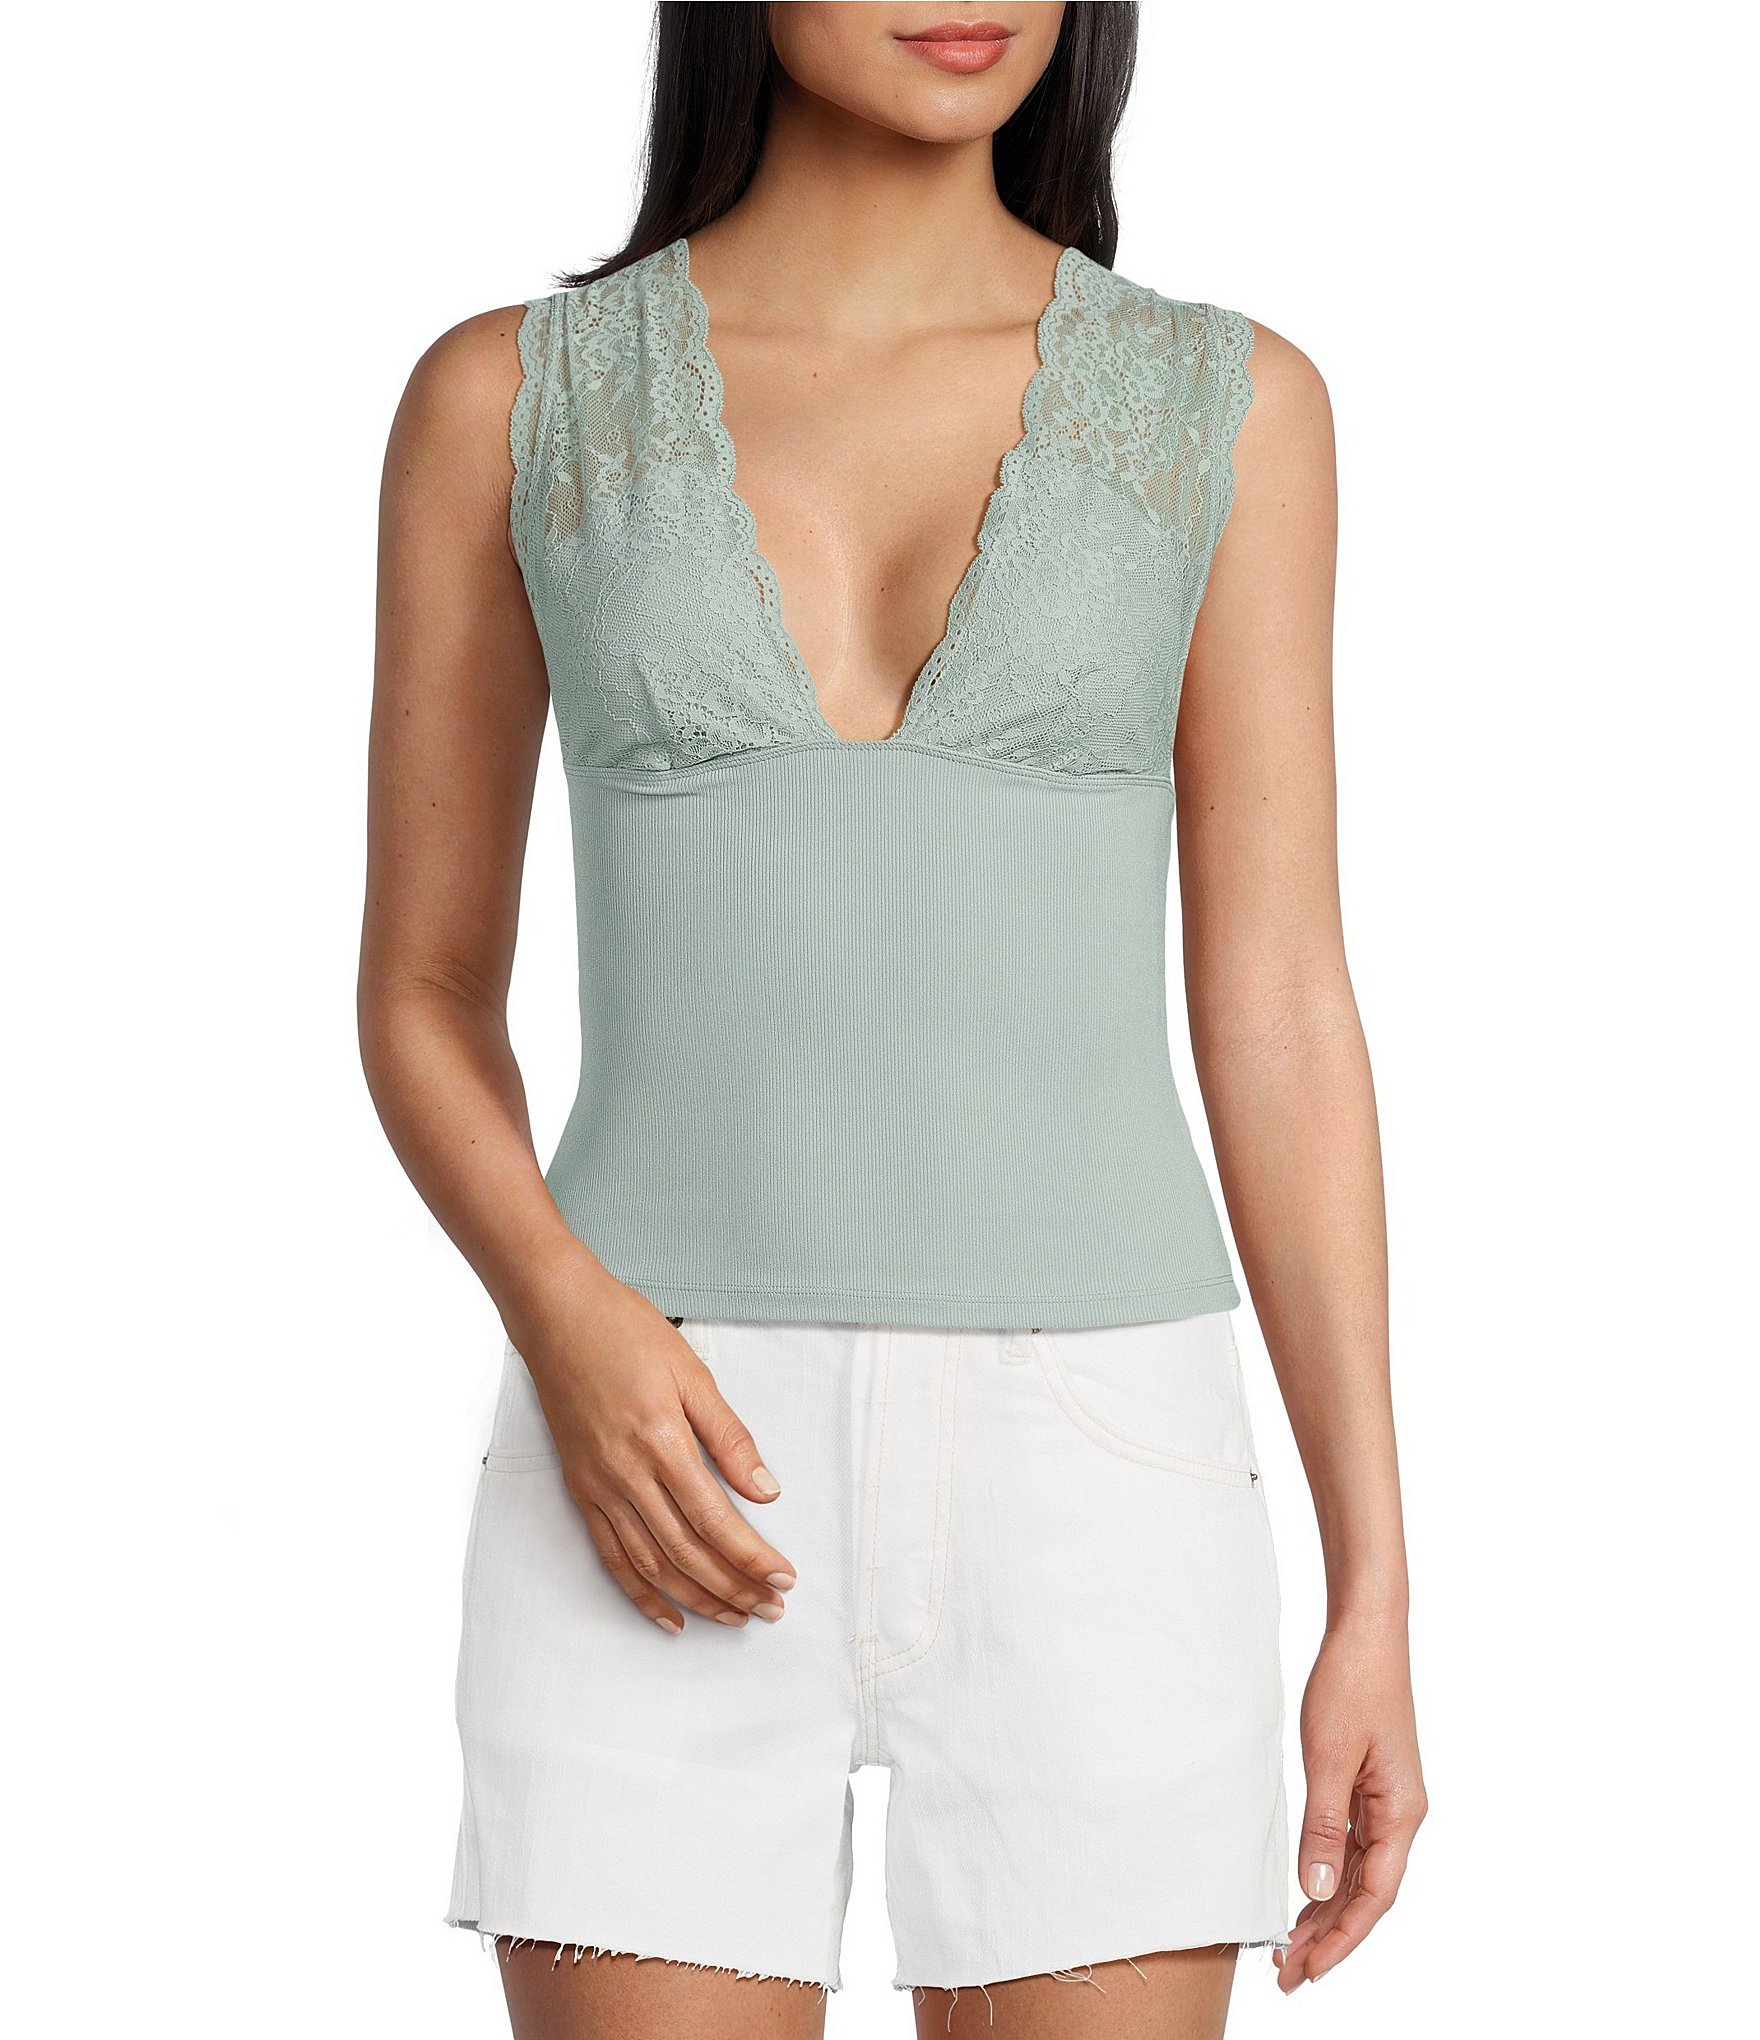 FREE PEOPLE MOVEMENT BREATHE DEEPER CAMI - BLUE PEARL 5794